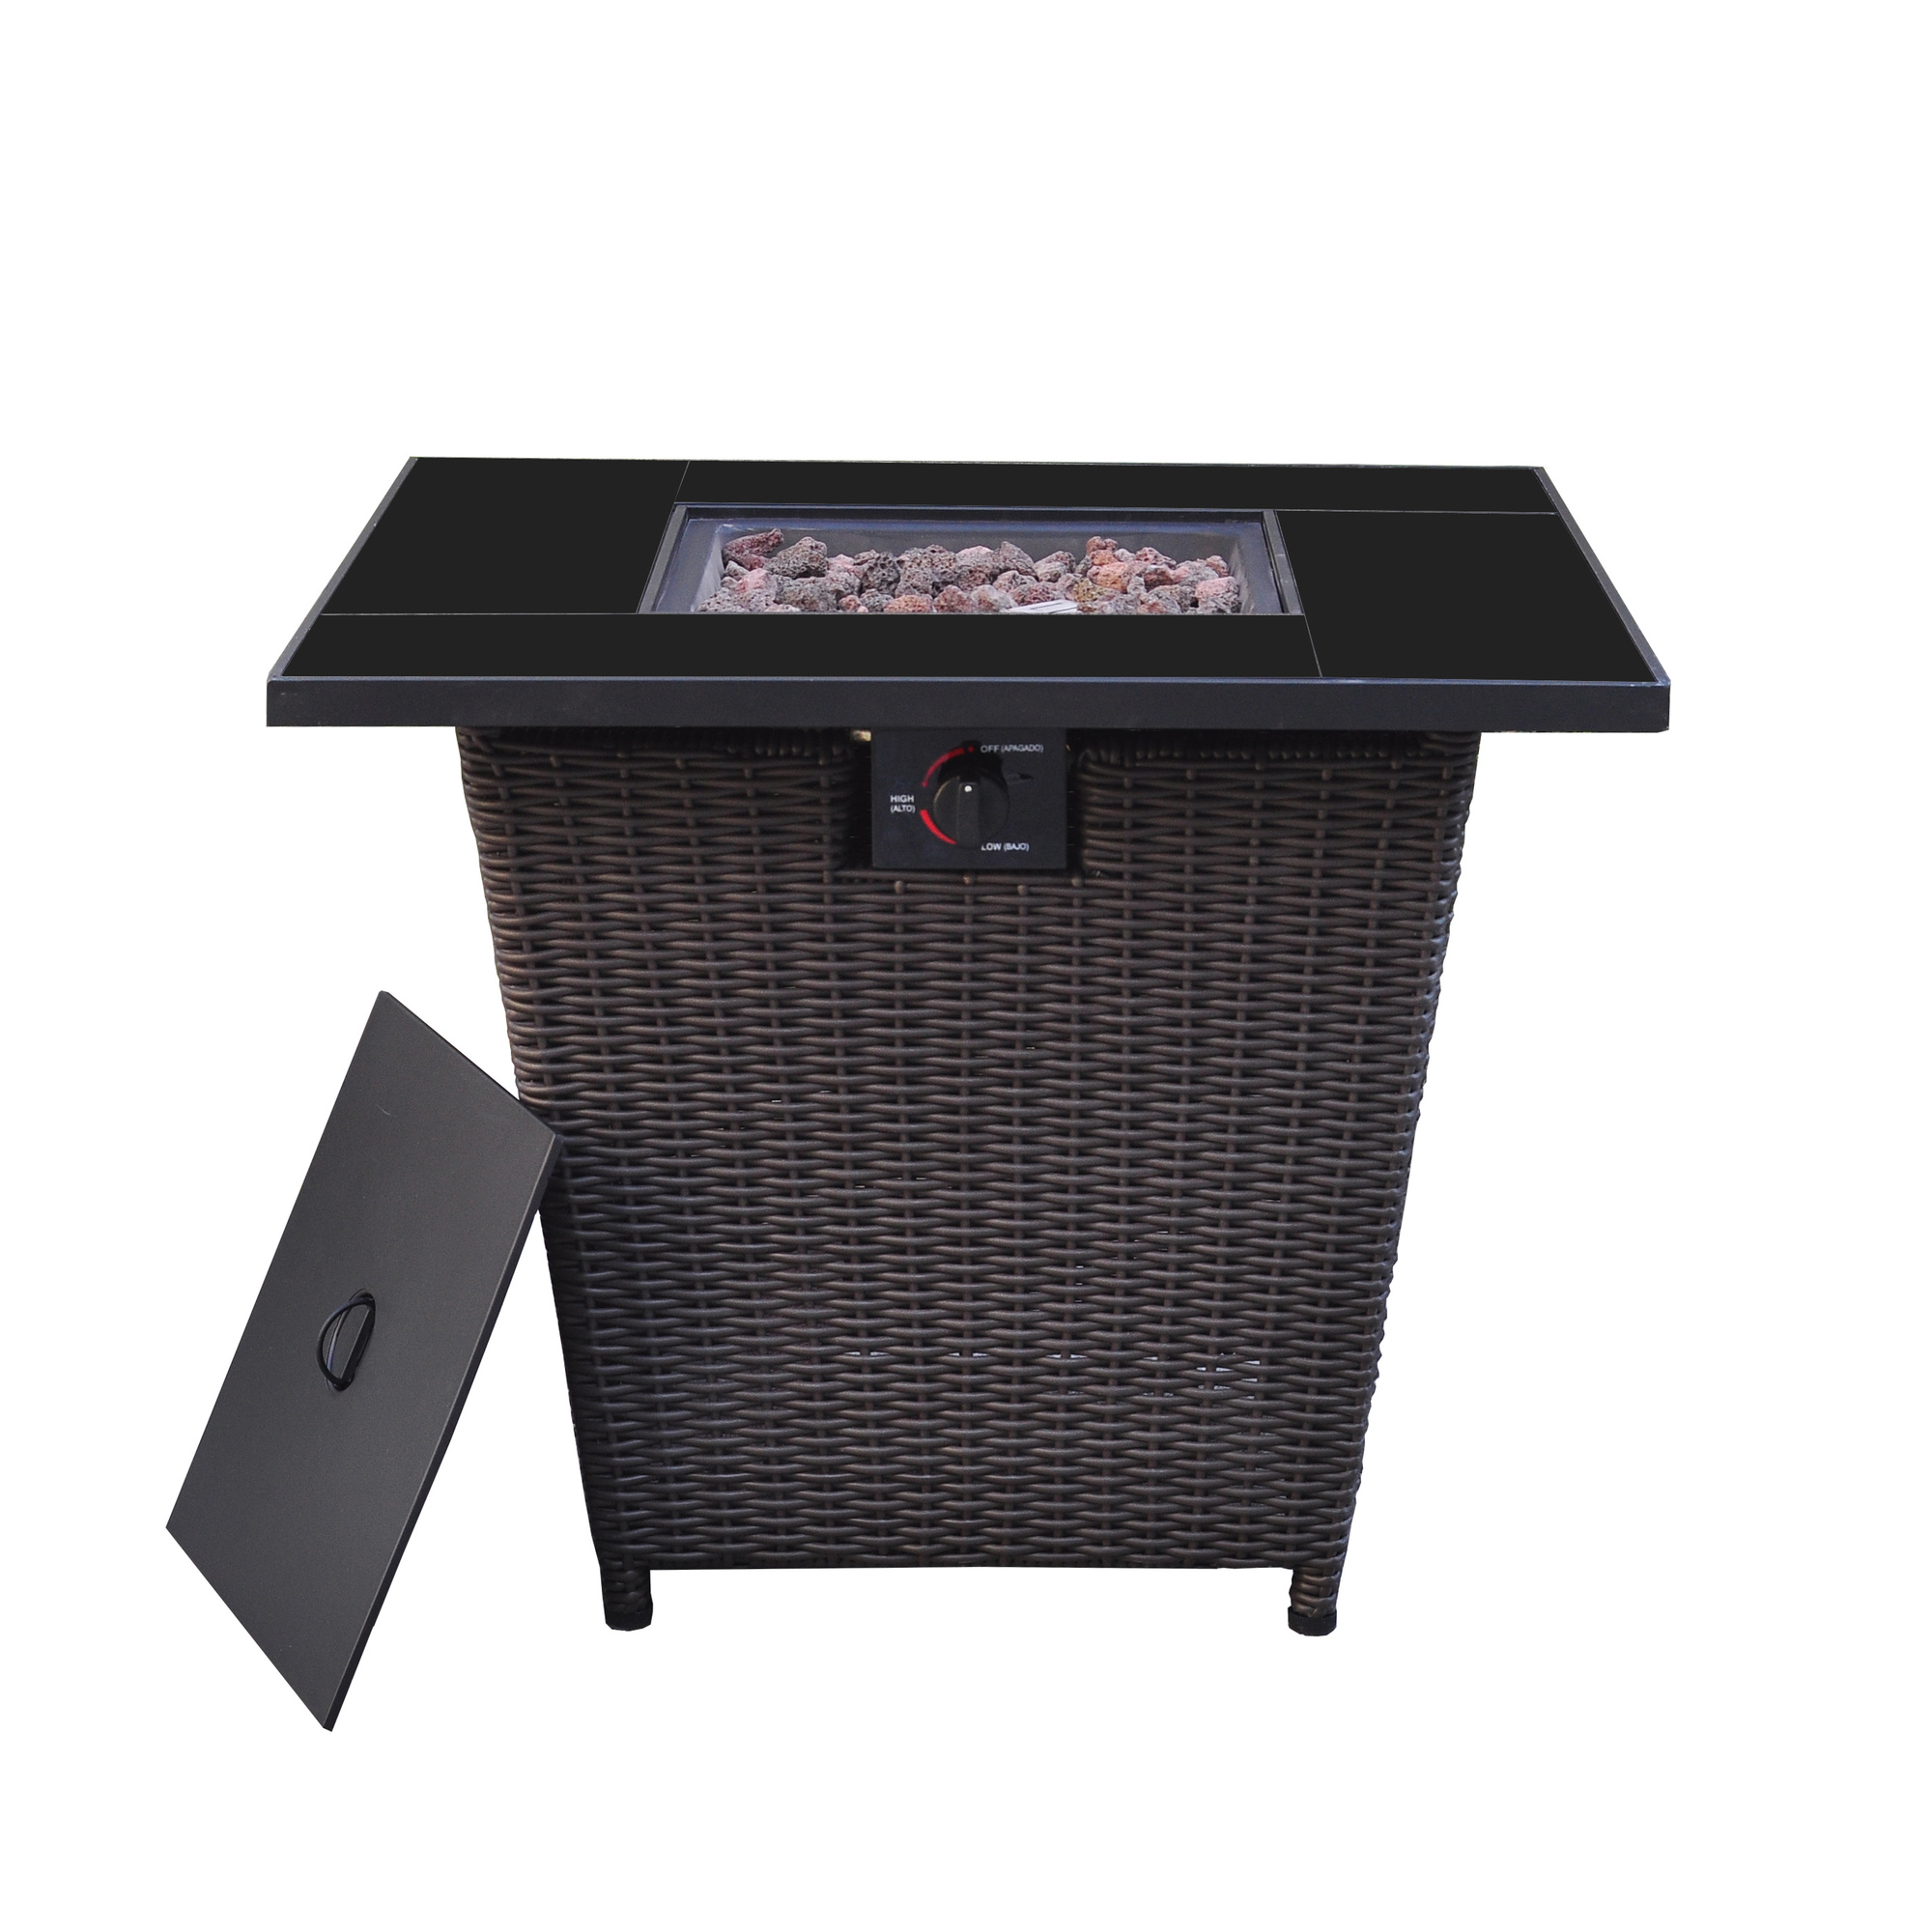 Bond, Catalina Cove 30Inch Gas Fire Pit, Fuel Type Propane, Material Steel, Model 52146